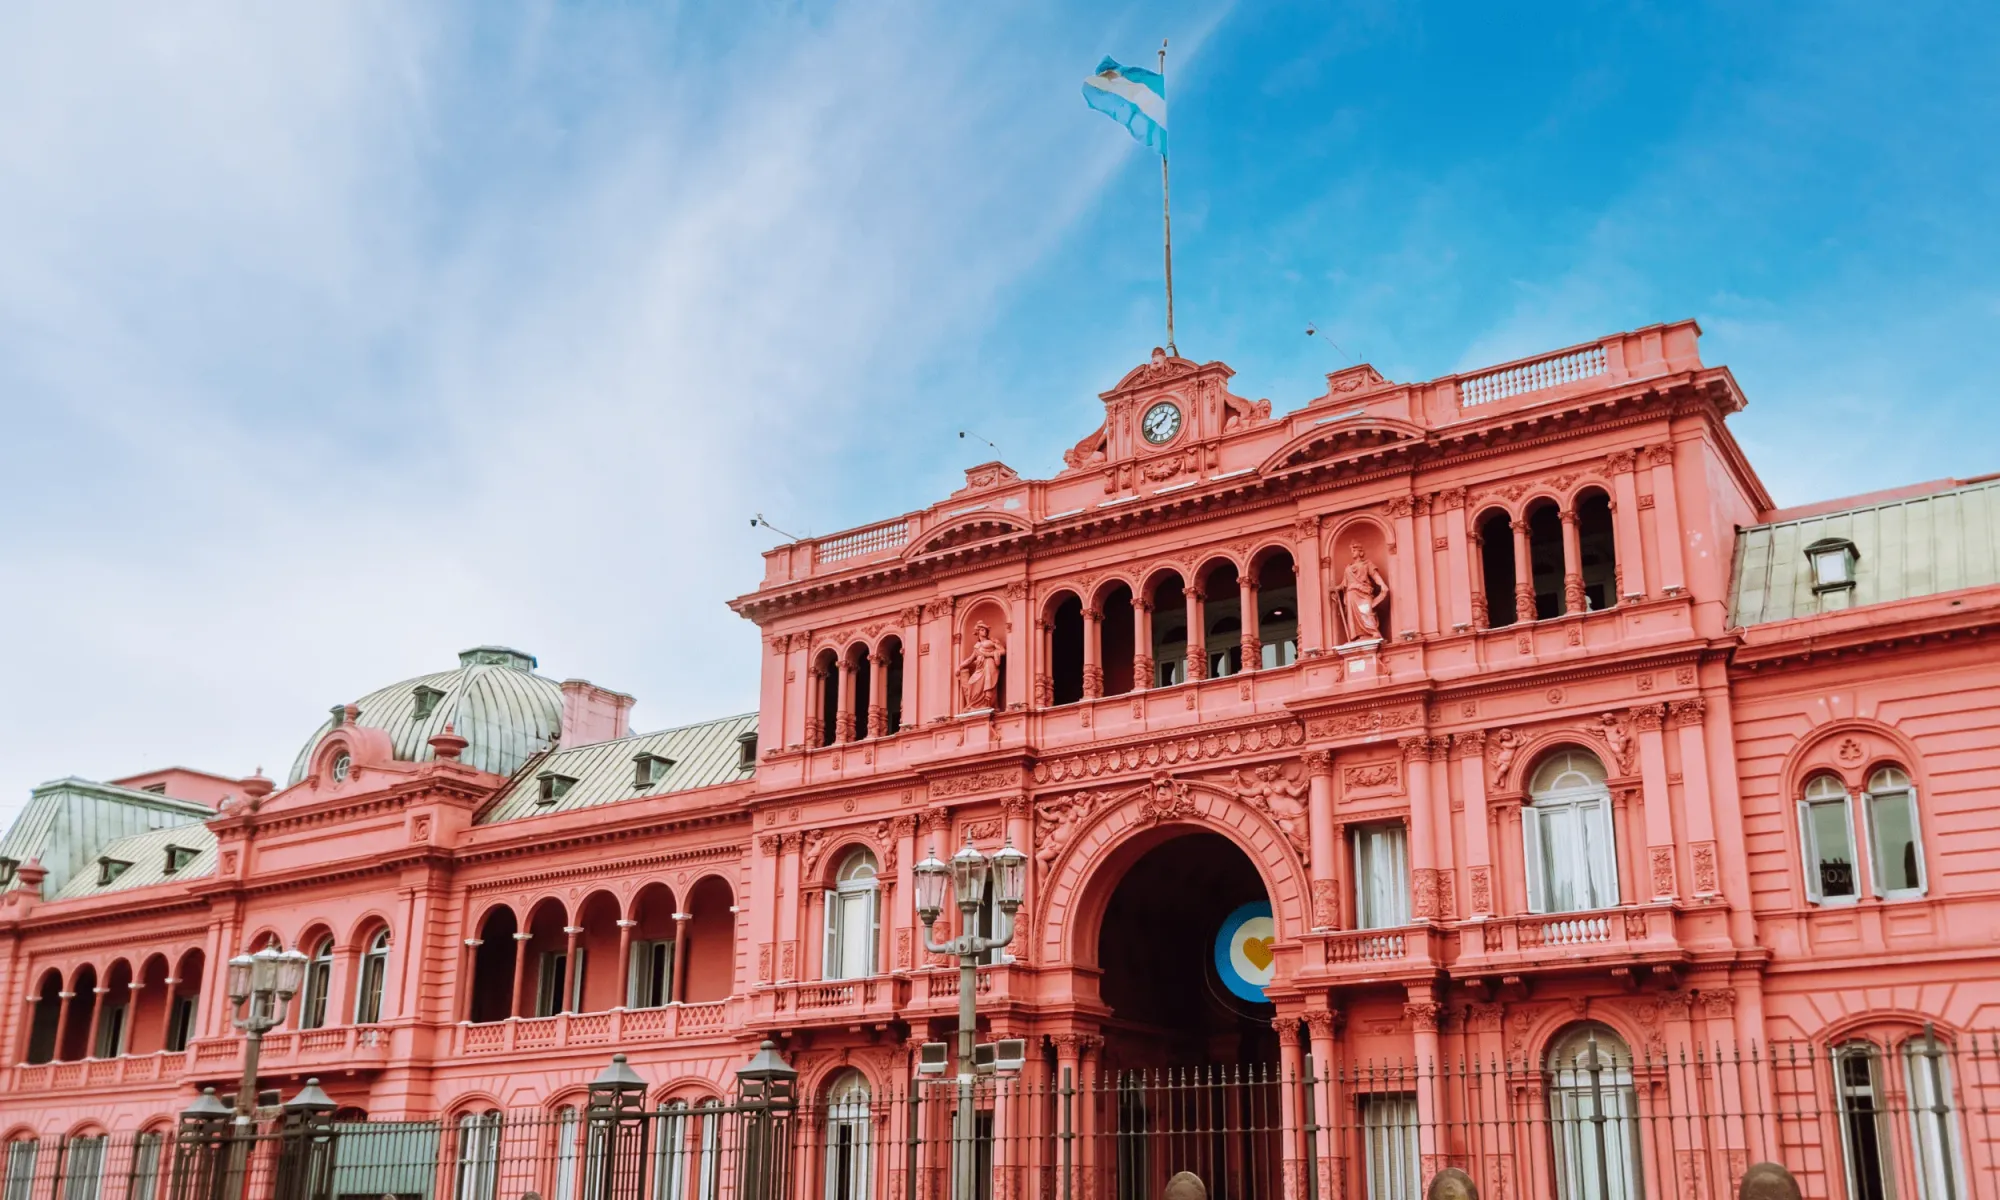 Colorful historic building in Argentina